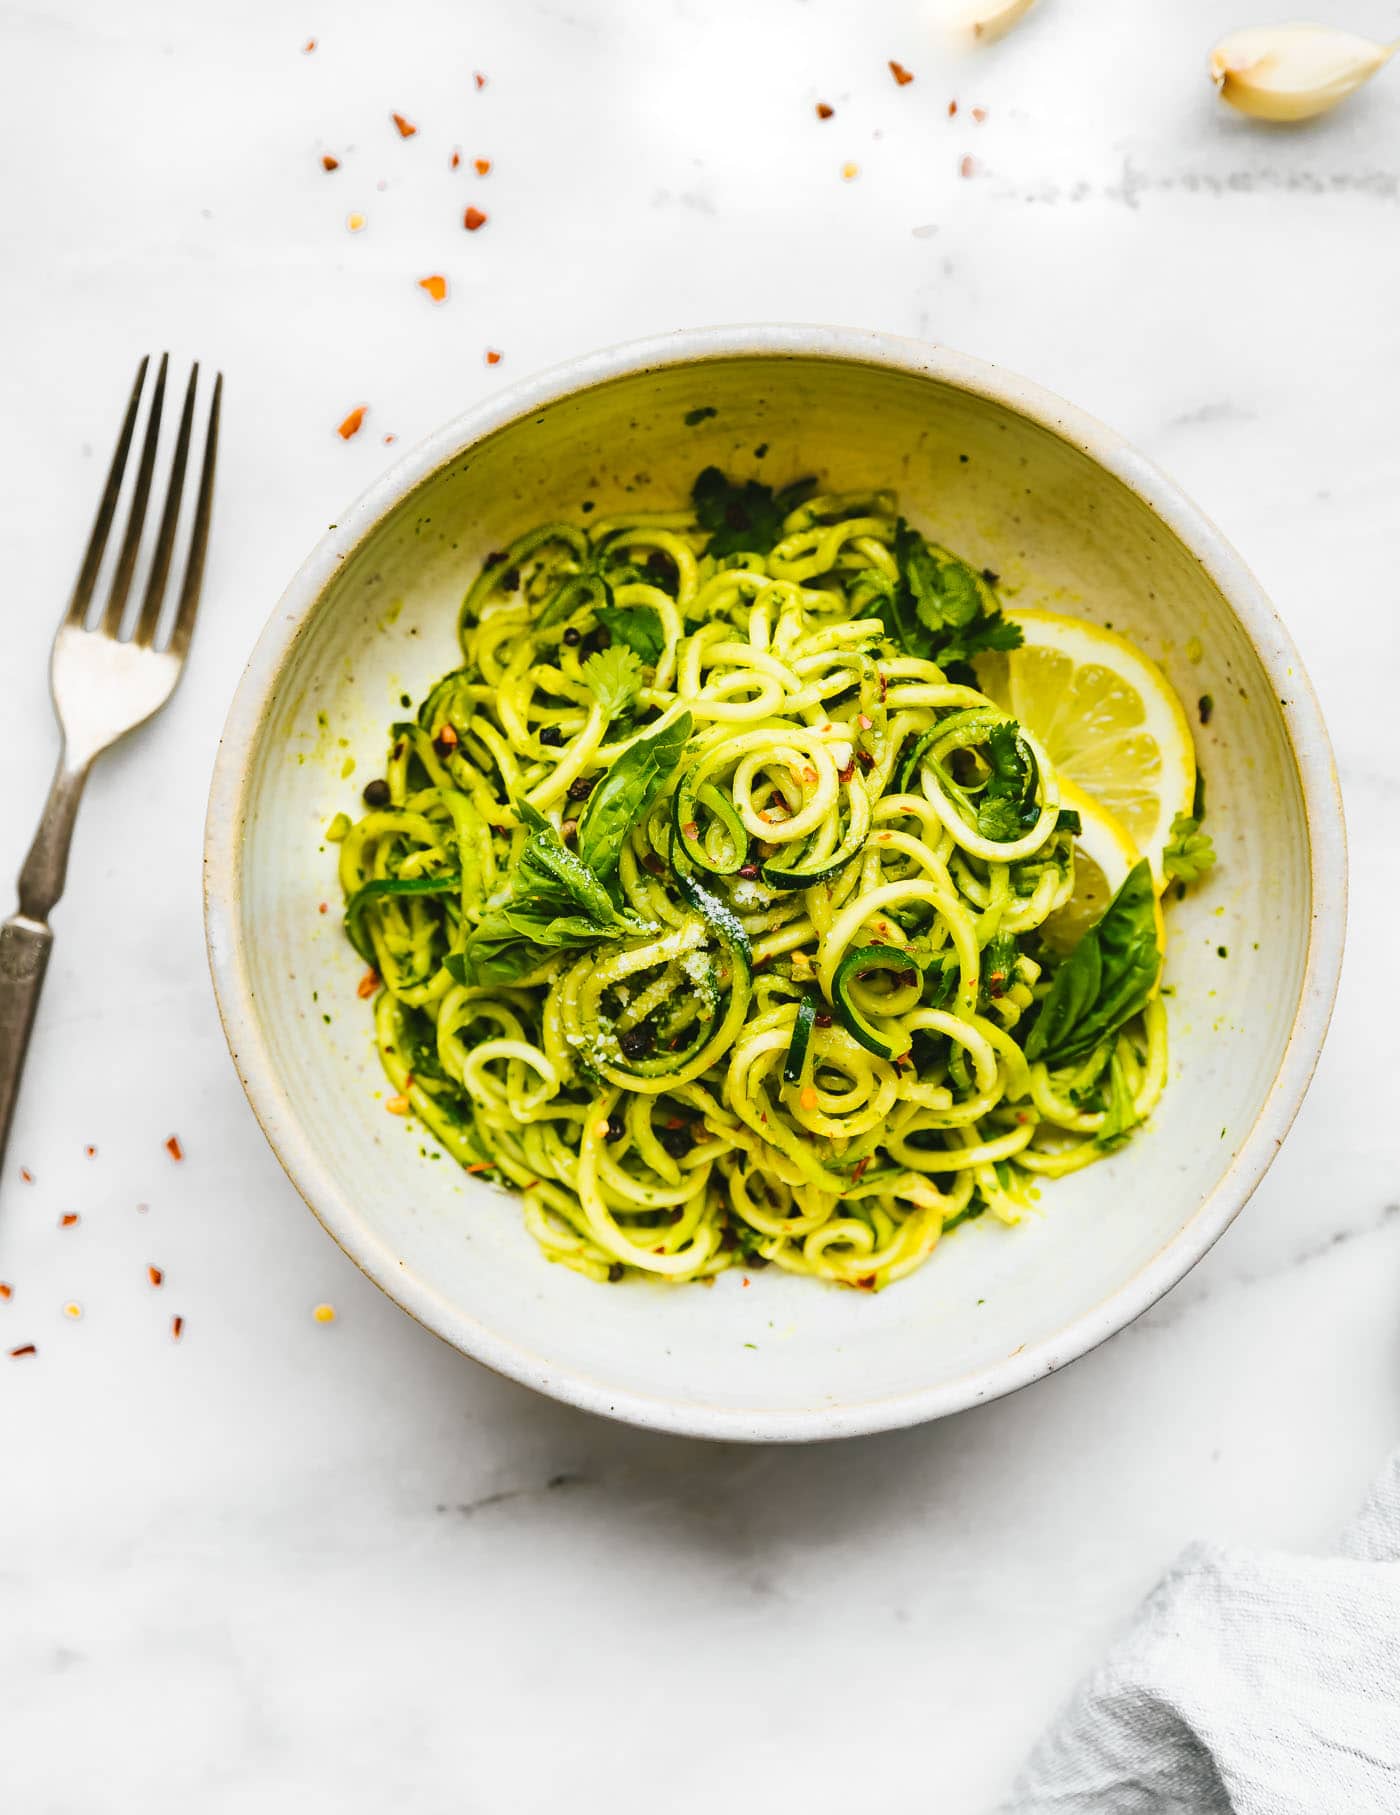 vegetarian dinner of zucchini noodle pasta with spicy pesto sauce